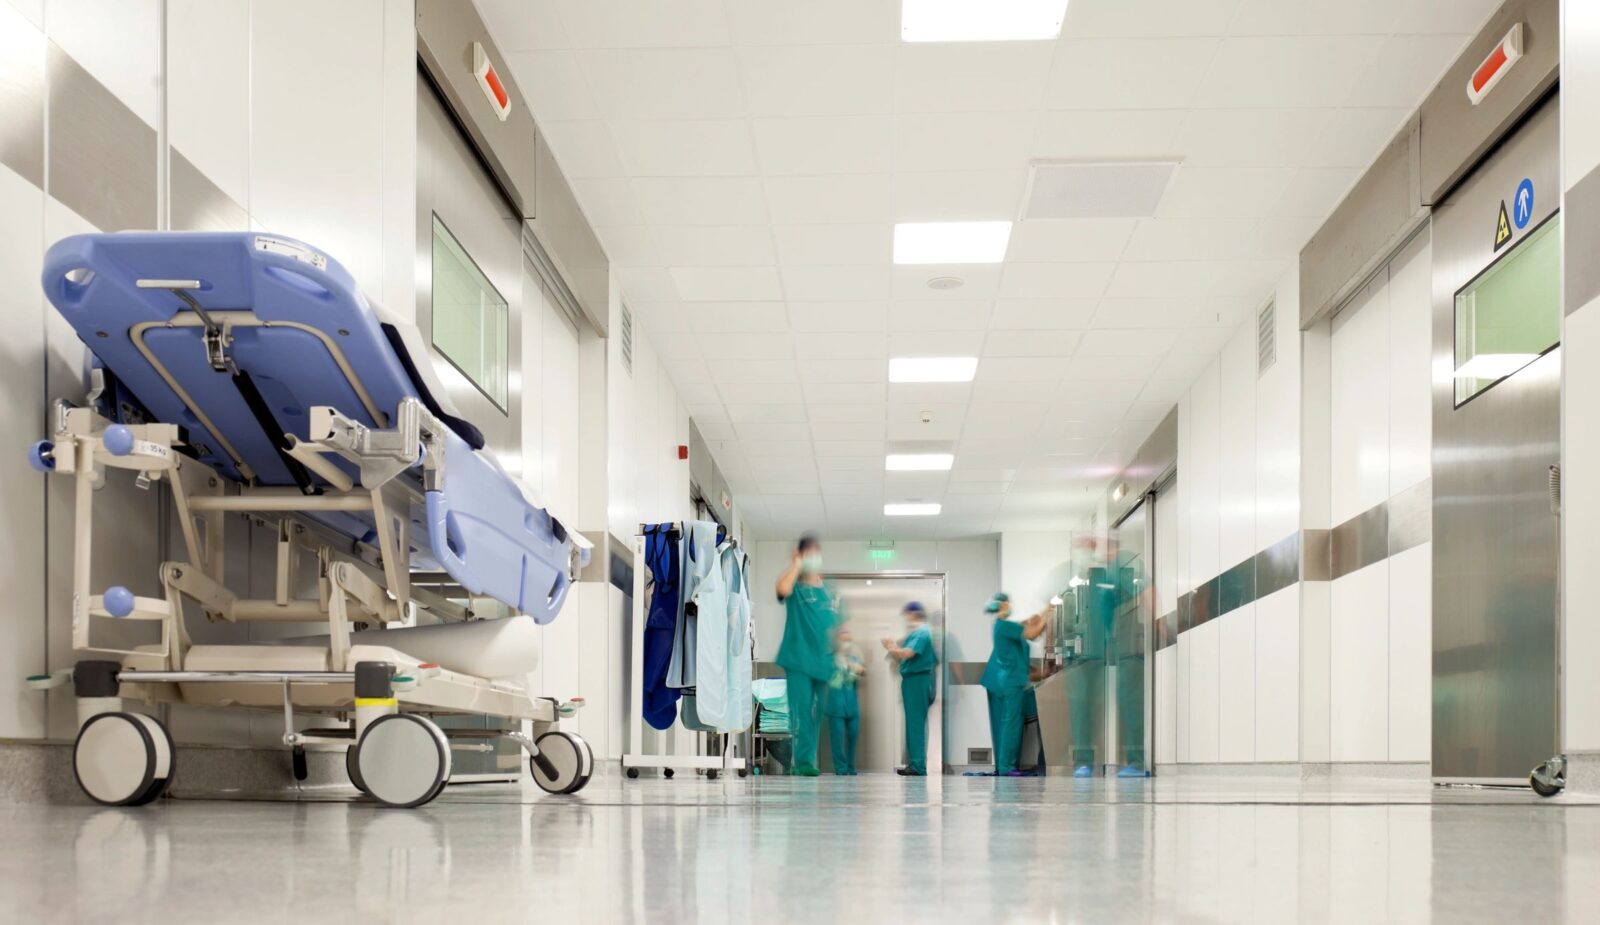 image of hospital hallway with hospital bed and people in scrubs in the distance